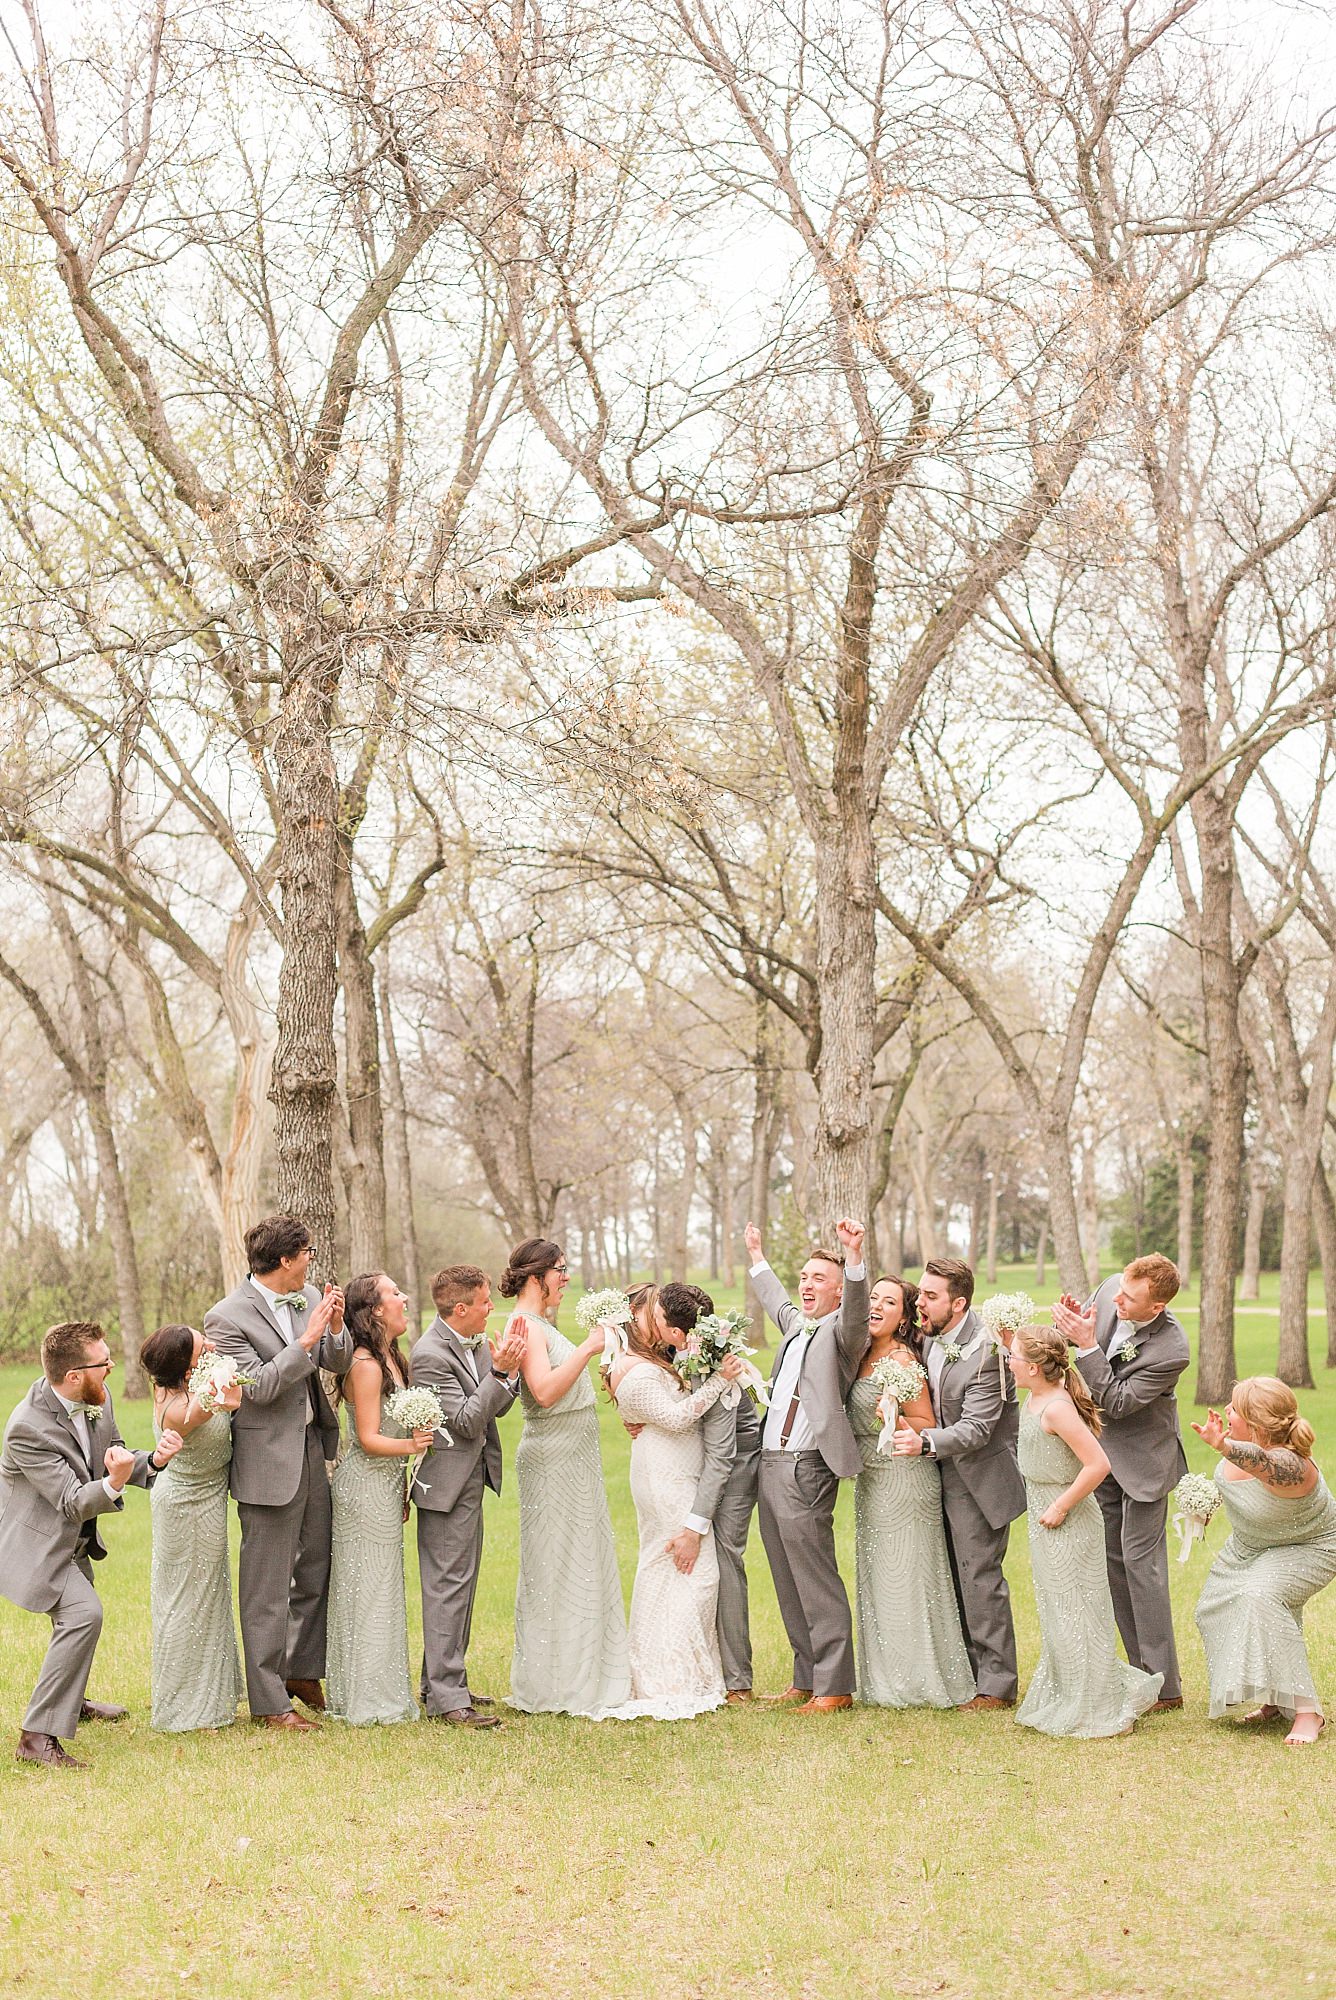 A wedding party in sea-foam green and grey cheer for the newlyweds